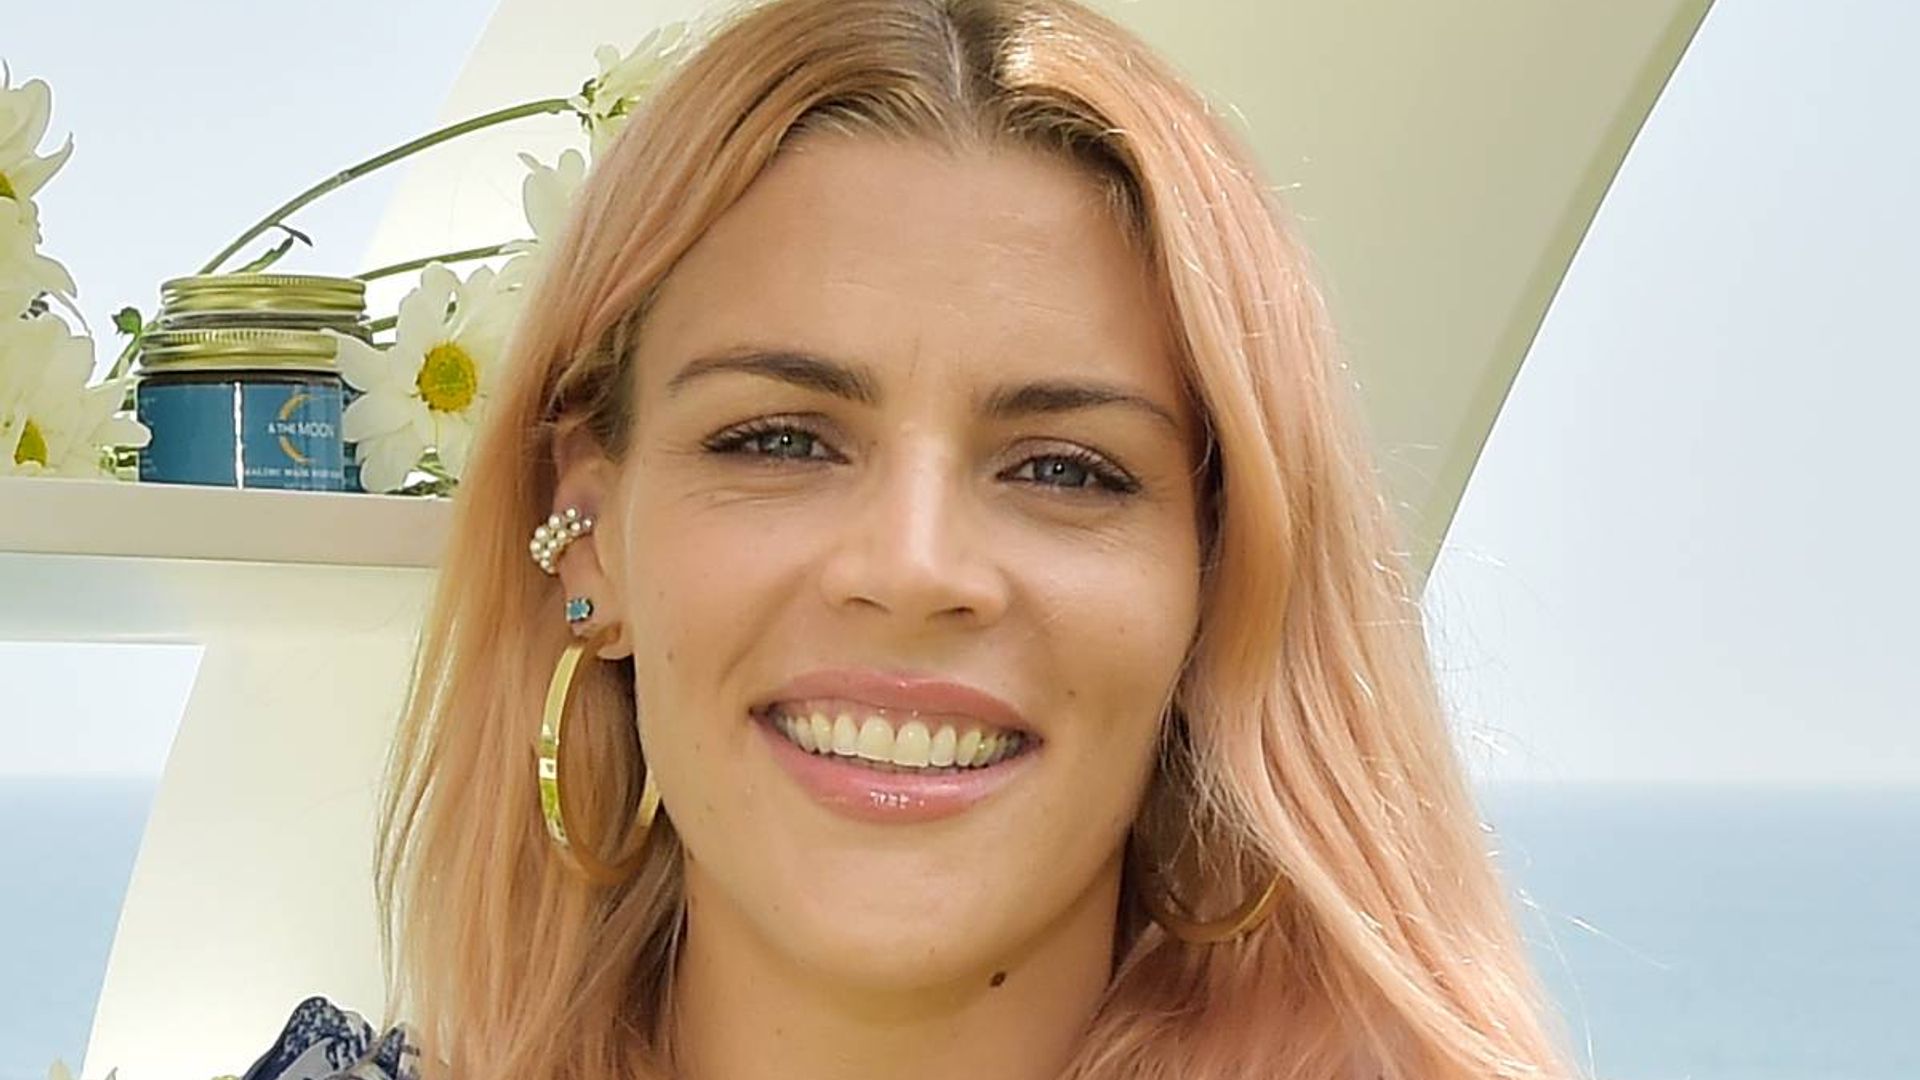 Busy Philipps' sexy bikini pic causes concern for mom after fans noticing swelling